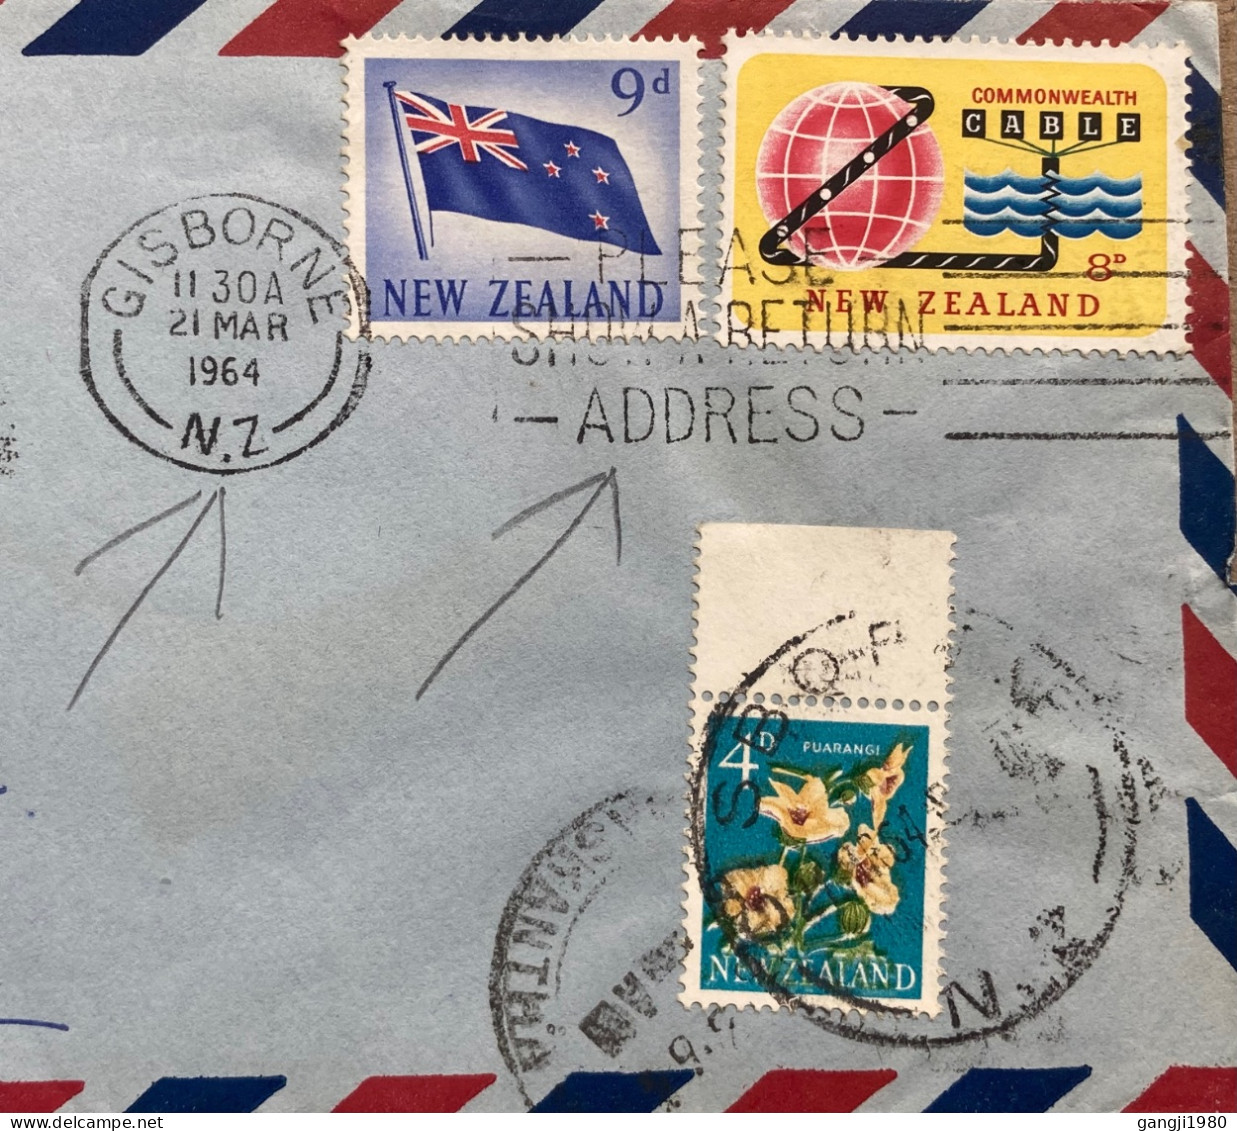 NEW-ZEALAND 1964, COVER USED TO INDIA, 3 DIFF STAMP, FLAG, CABLE, FLOWER, GISBORNE CITY SLOGAN, PLEASE SHOW RETURN ADDRE - Covers & Documents